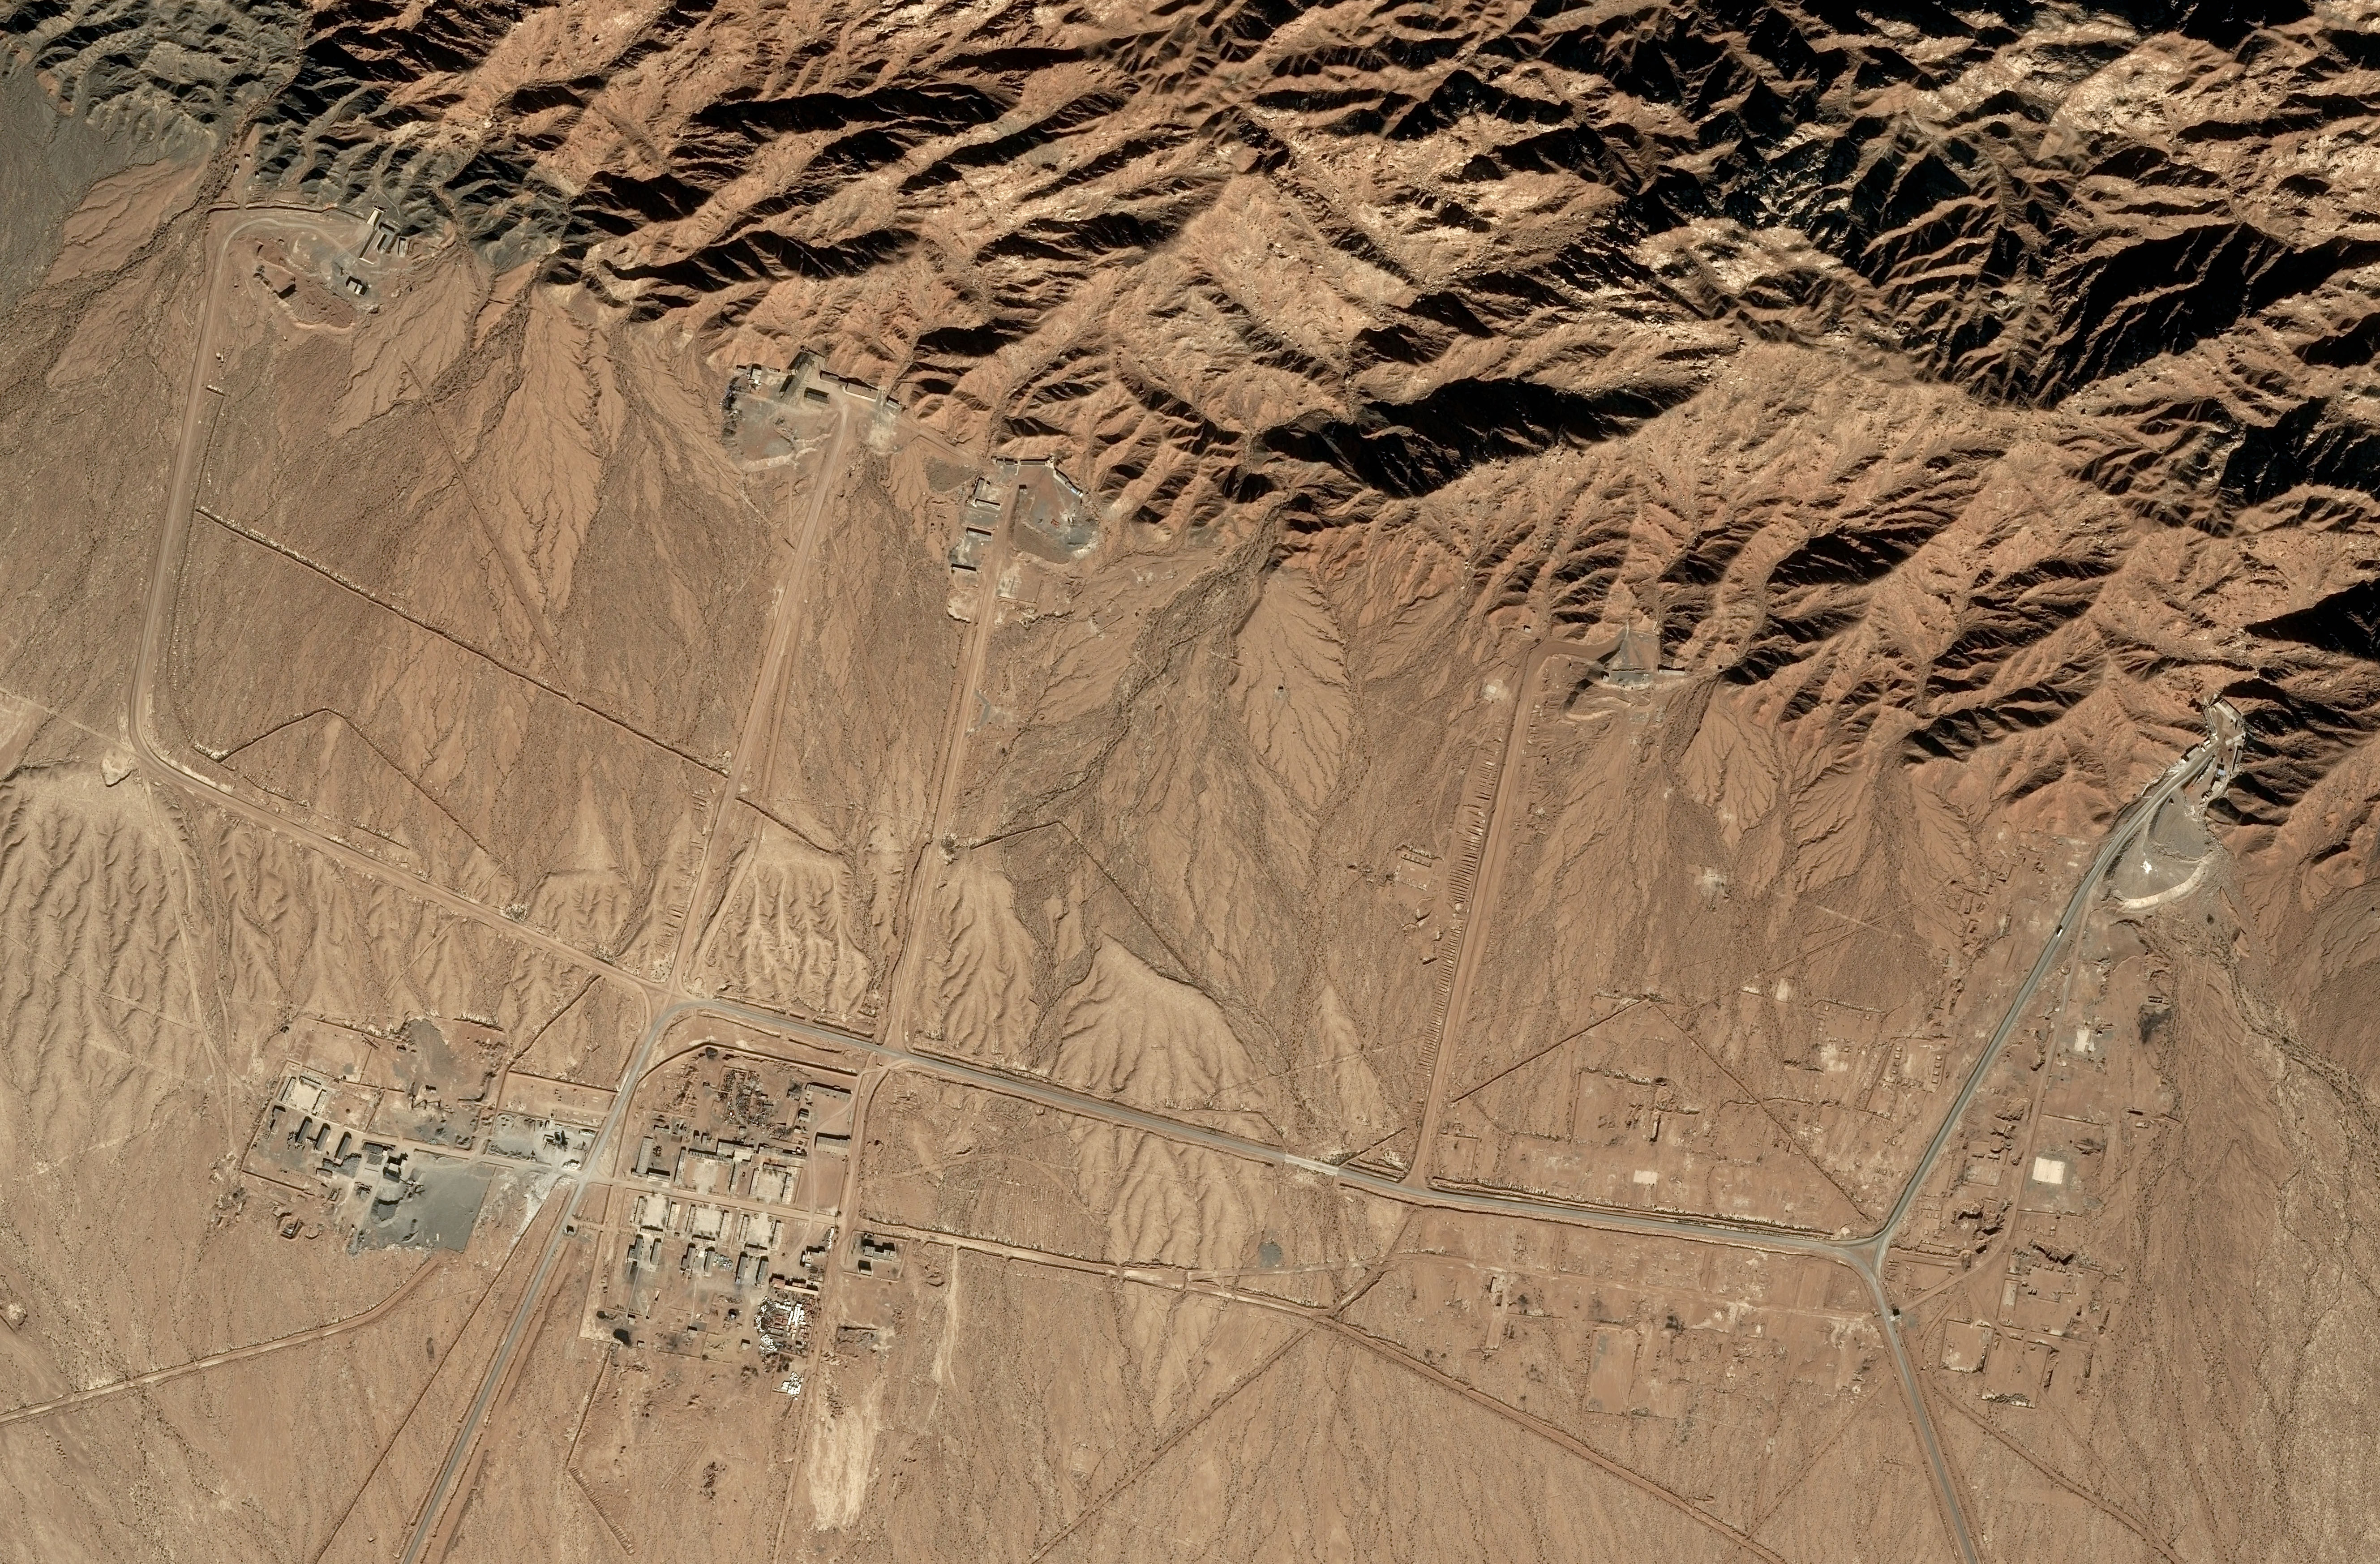 Commercial satellite imagery captured on 8 November 2019 showing the Lop Nur nuclear weapons test site in China's northwestern Xinjiang Uygur Autonomous Region. The US State Department has expressed concern over the high level of activity maintained at the site throughout 2019. (CNES 2019, Distribution Airbus DS)